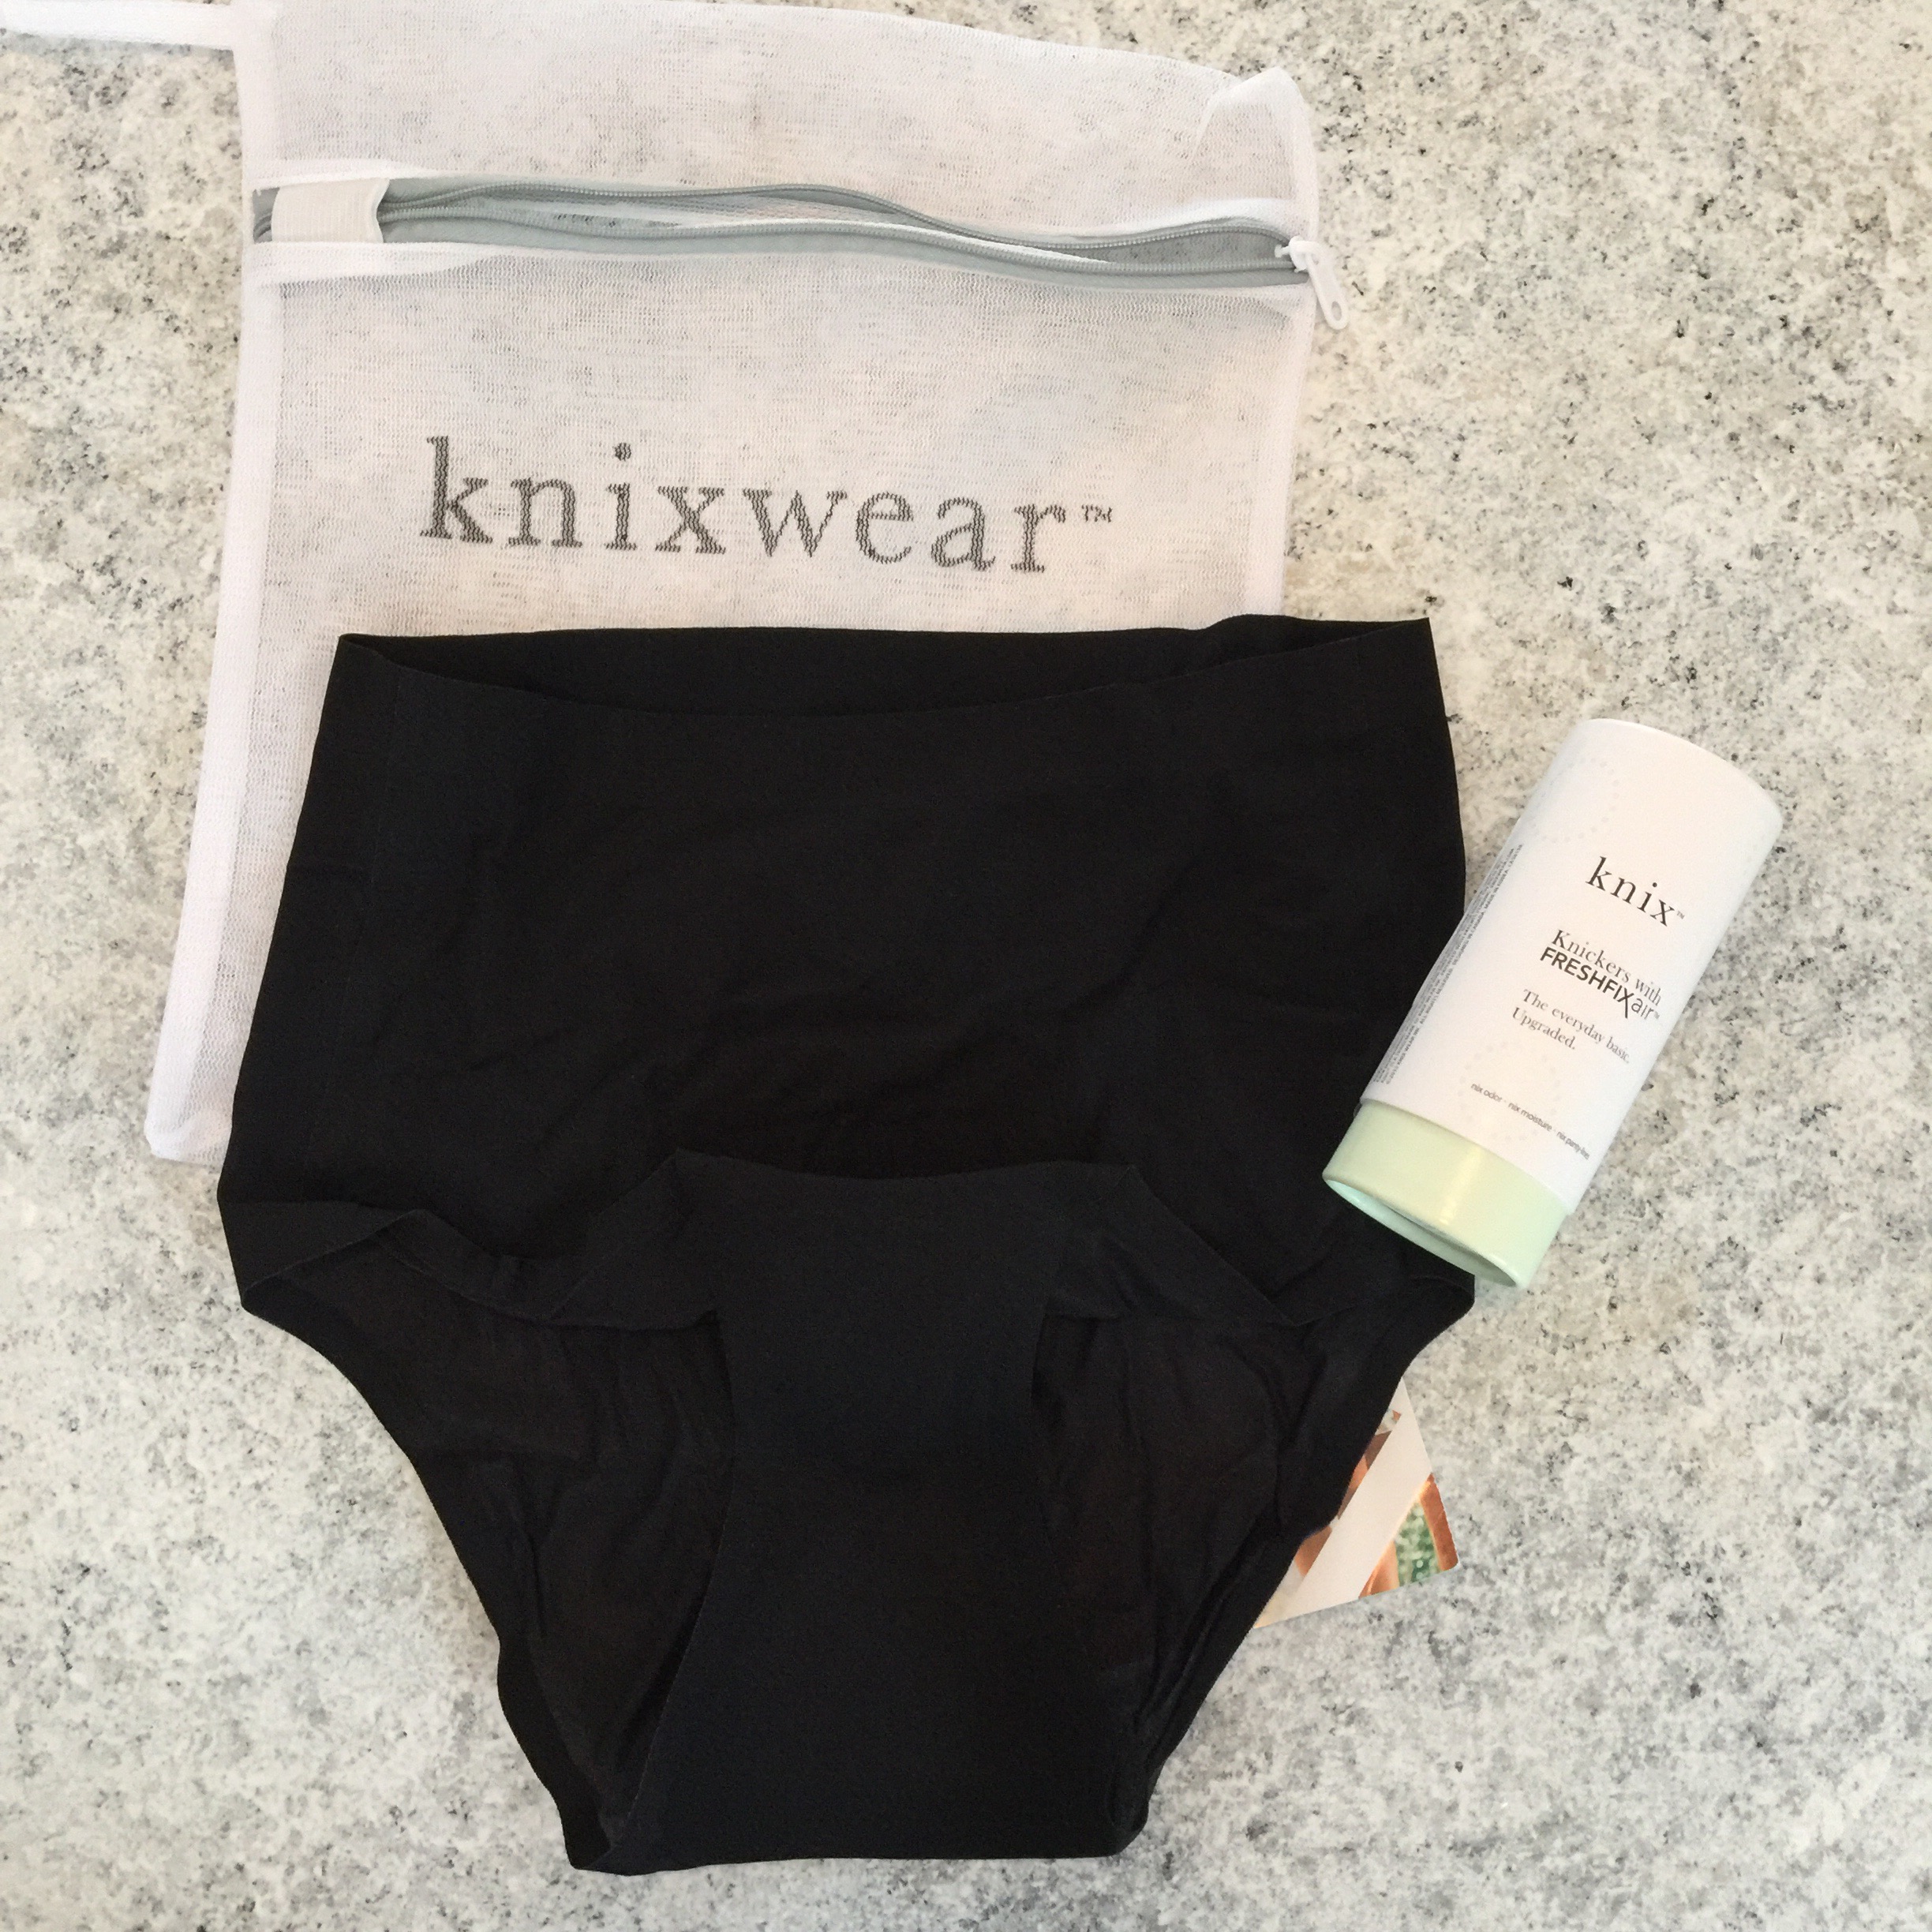 Product Review: Knixwear